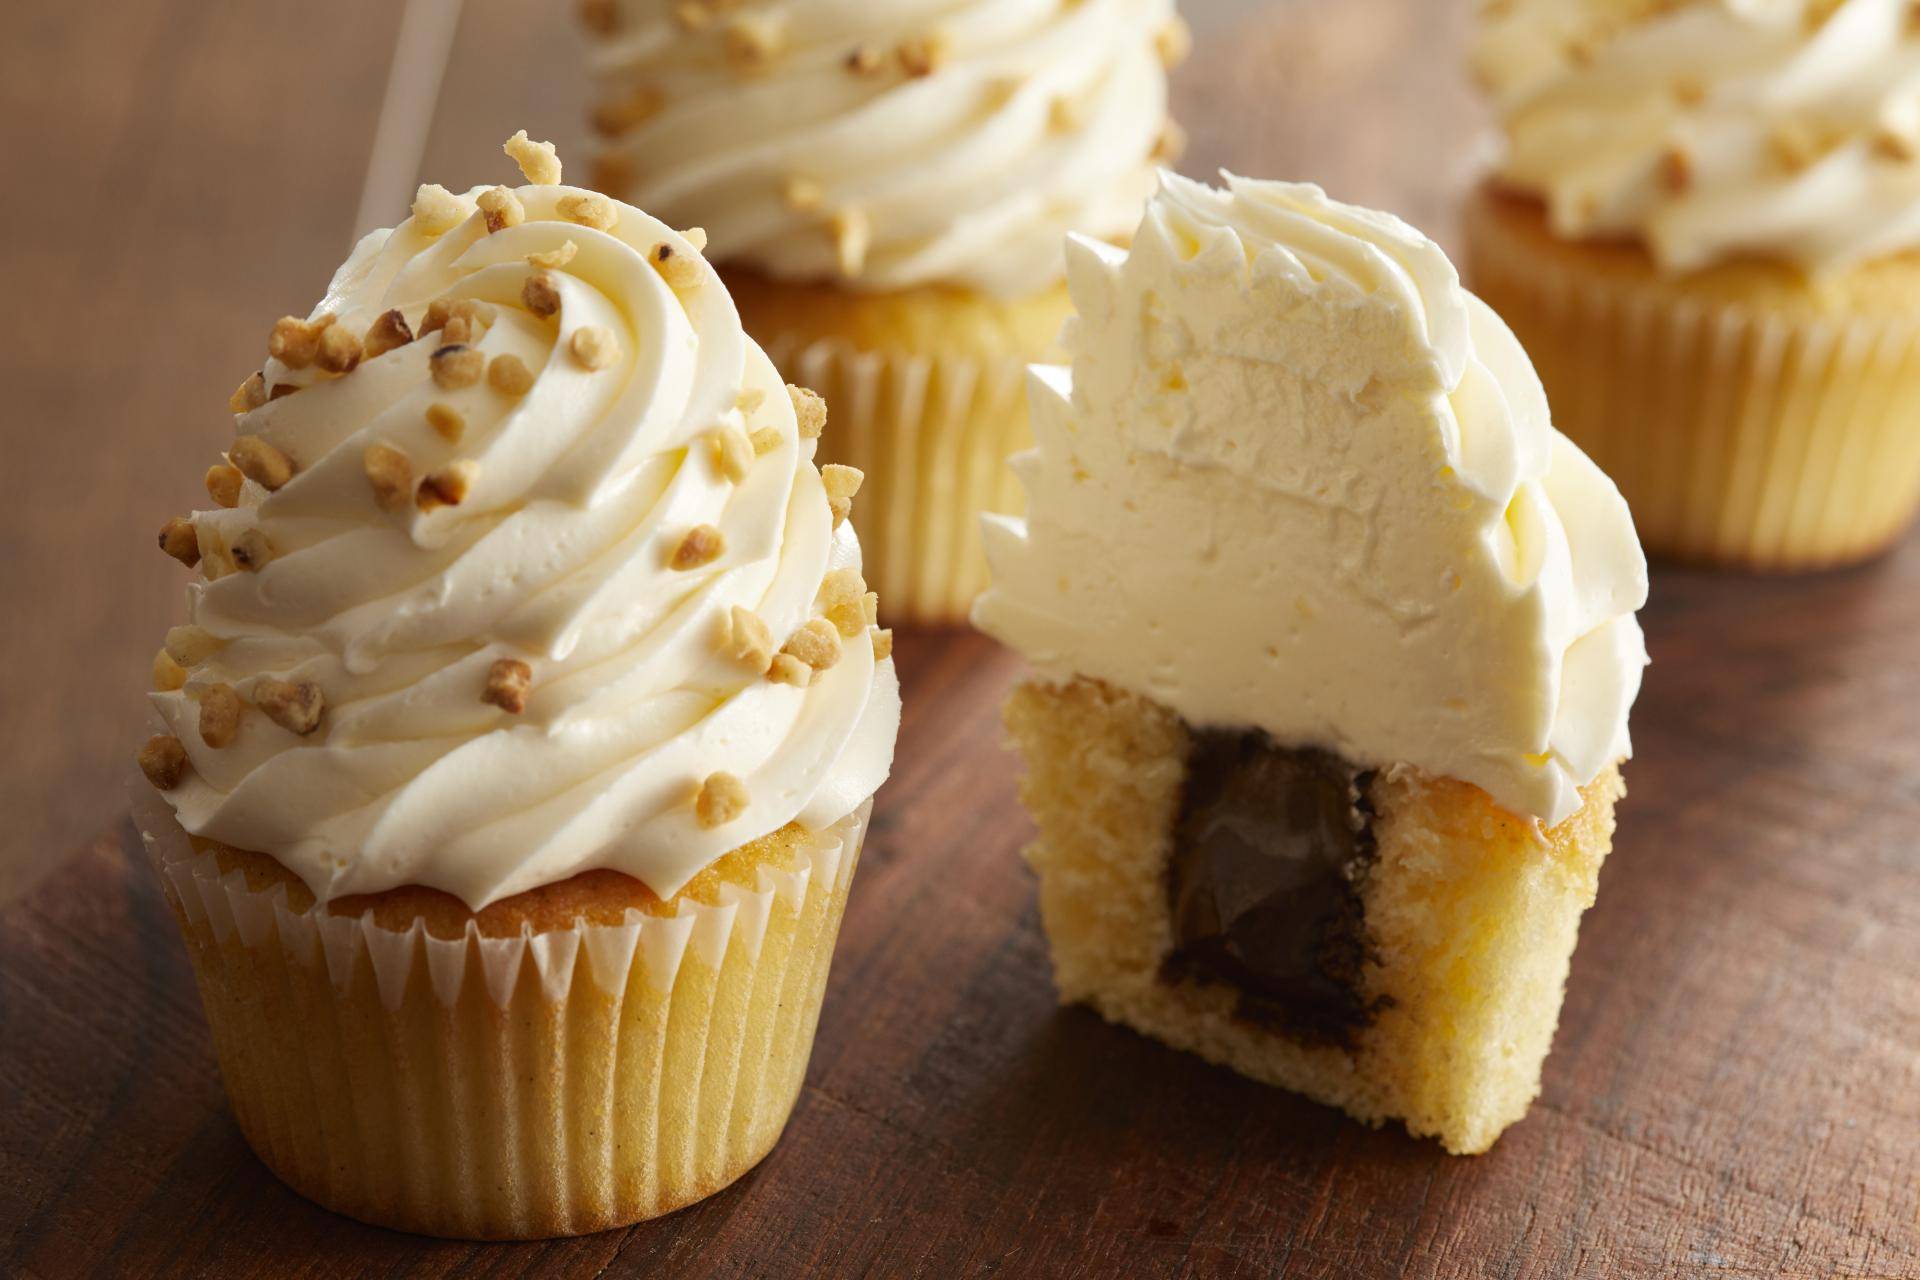 Almond Cupcakes with Almond Buttercream